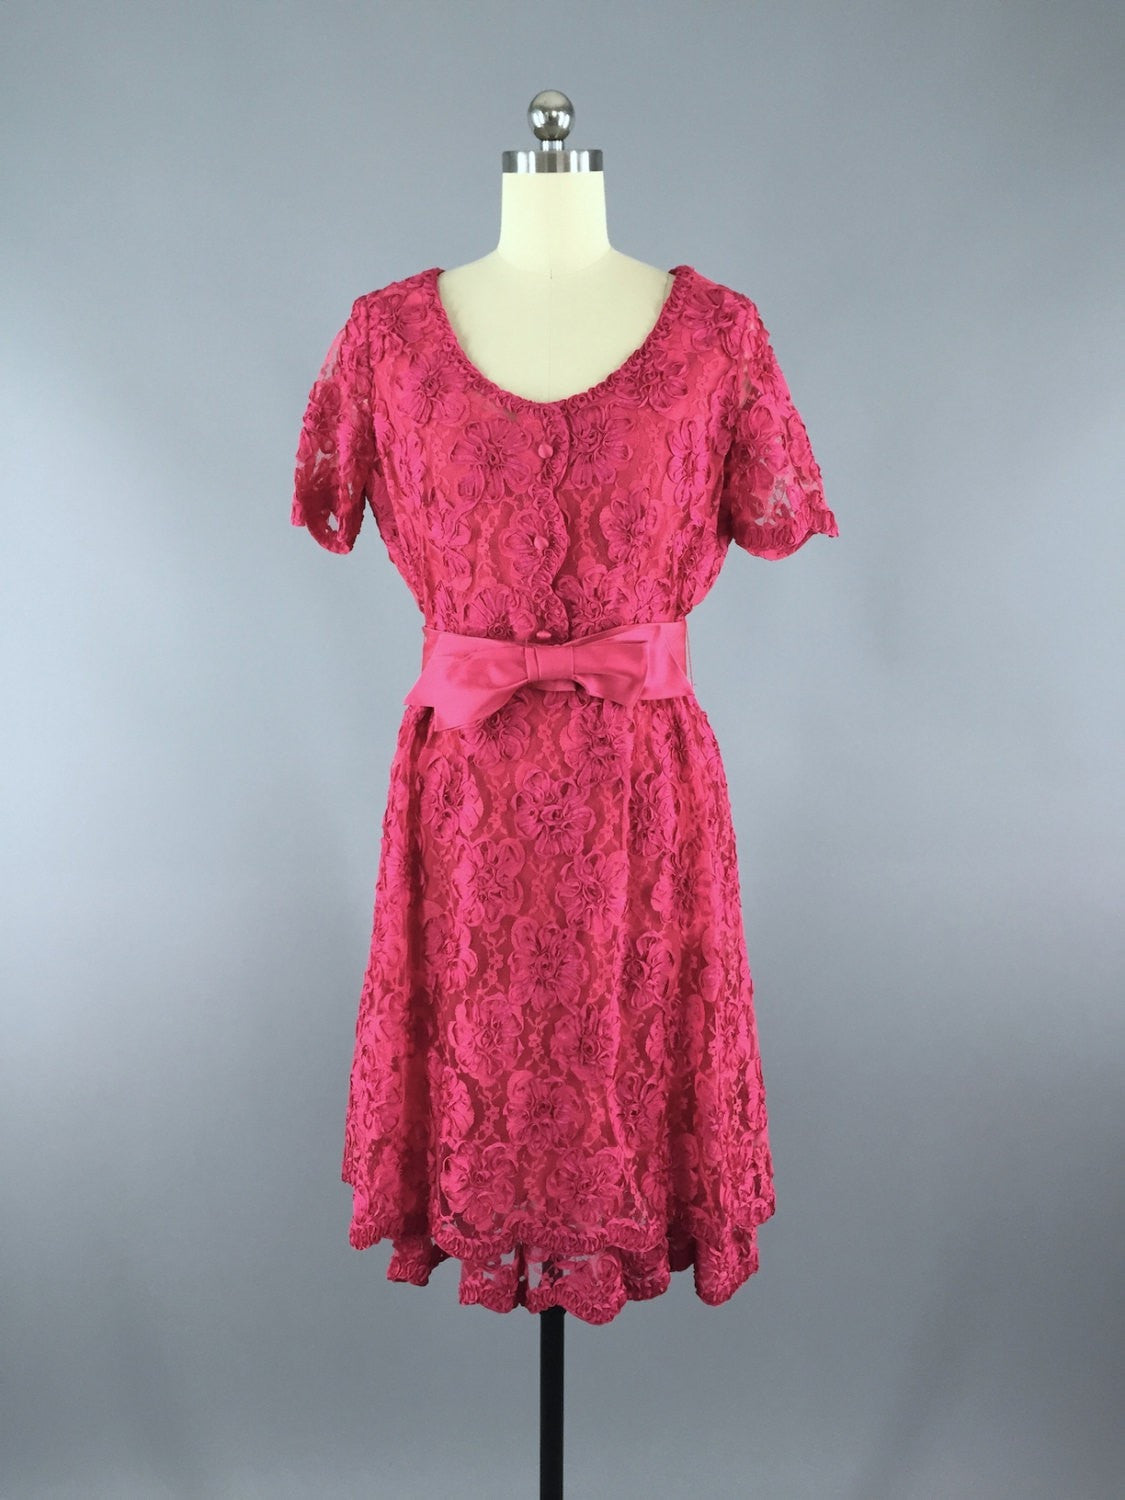 1960s Vintage Pink Lace Dress by Sophisticated Miss - ThisBlueBird